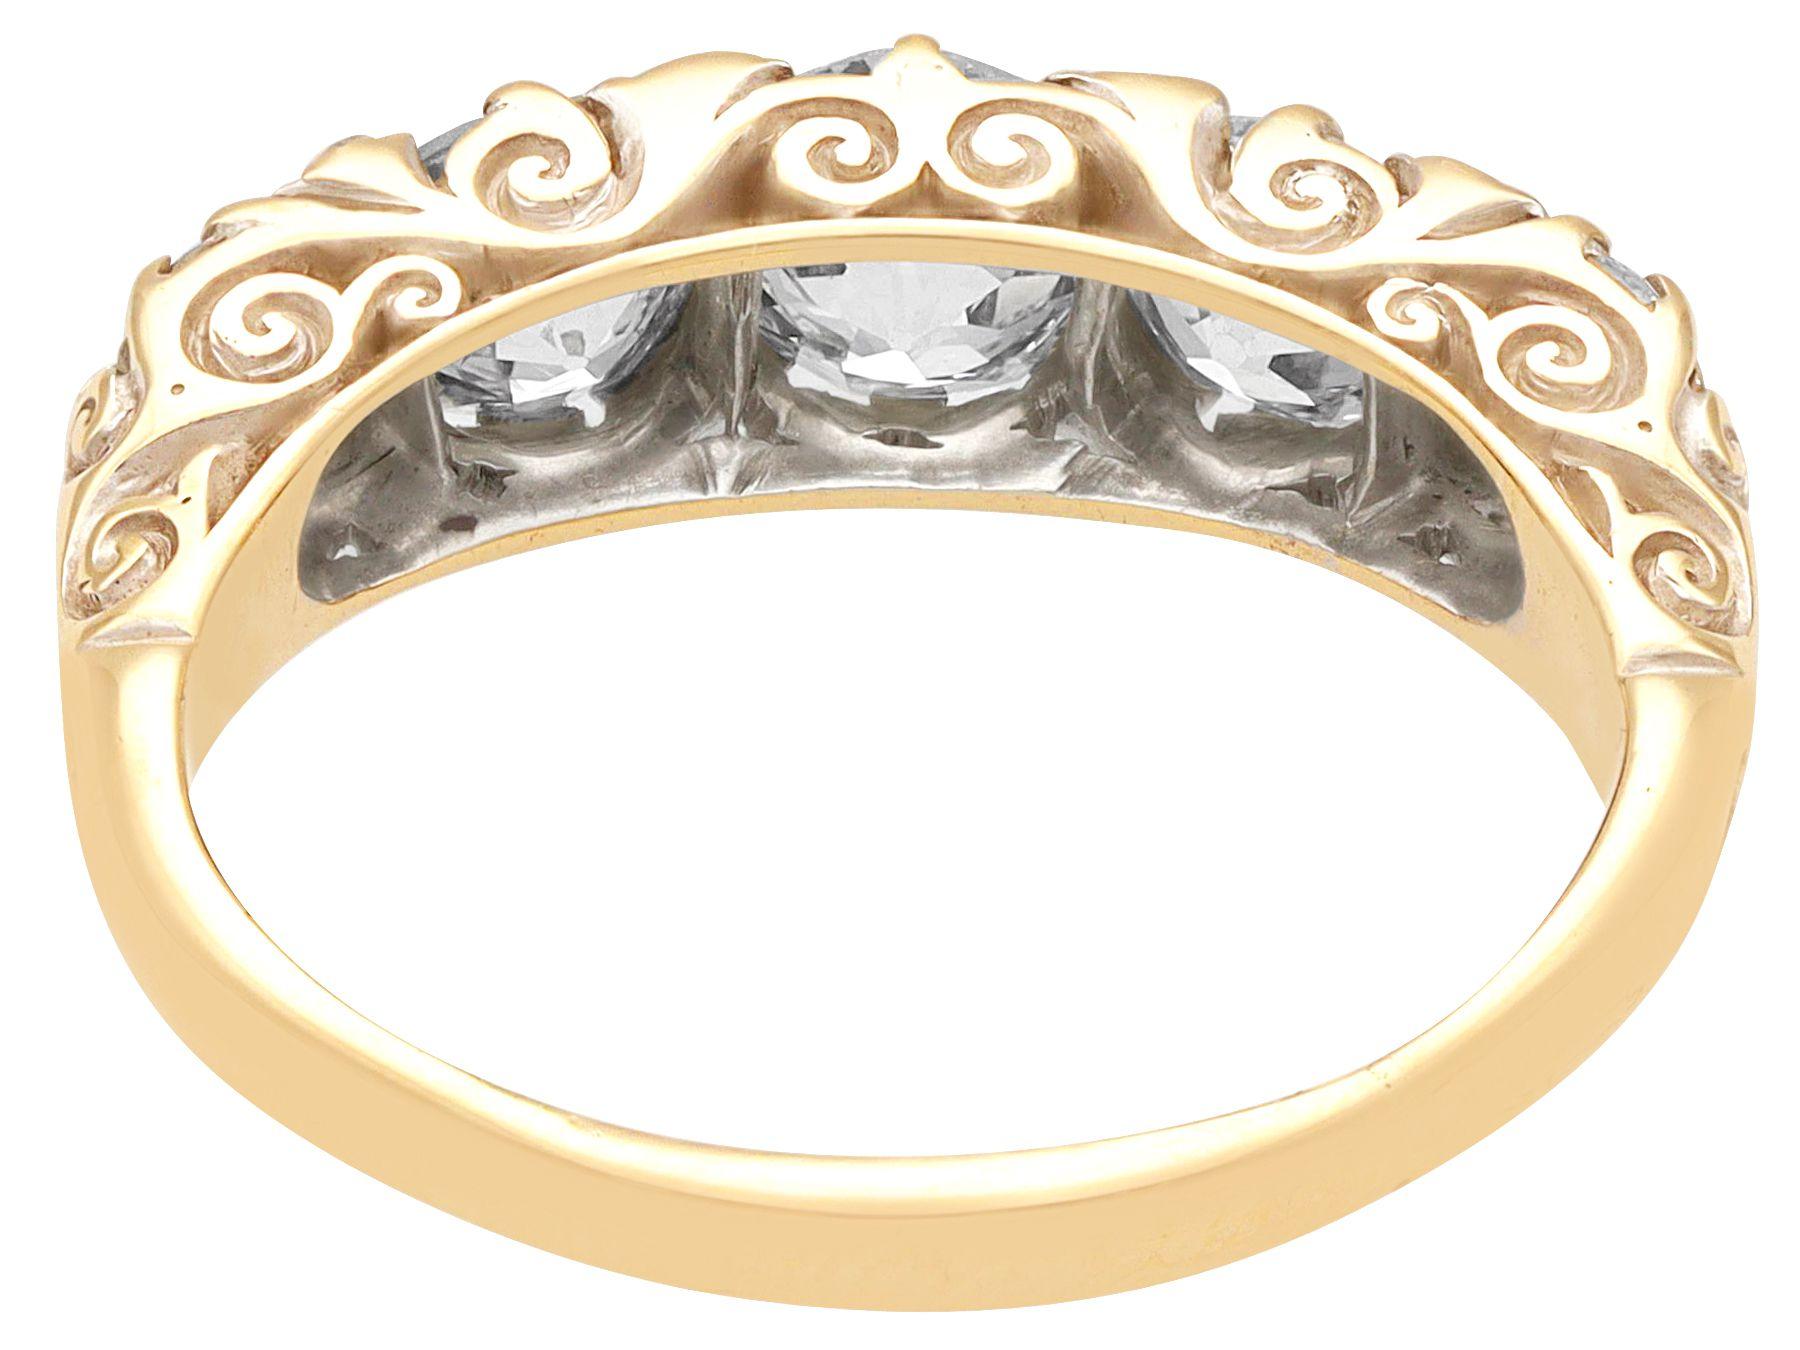 A stunning, fine and impressive antique 2.52 carat diamond, 15 karat yellow gold and silver set five stone ring; part of our antique estate jewelry collections.

This stunning antique Edwardian 5 stone diamond ring has been crafted in 15k yellow